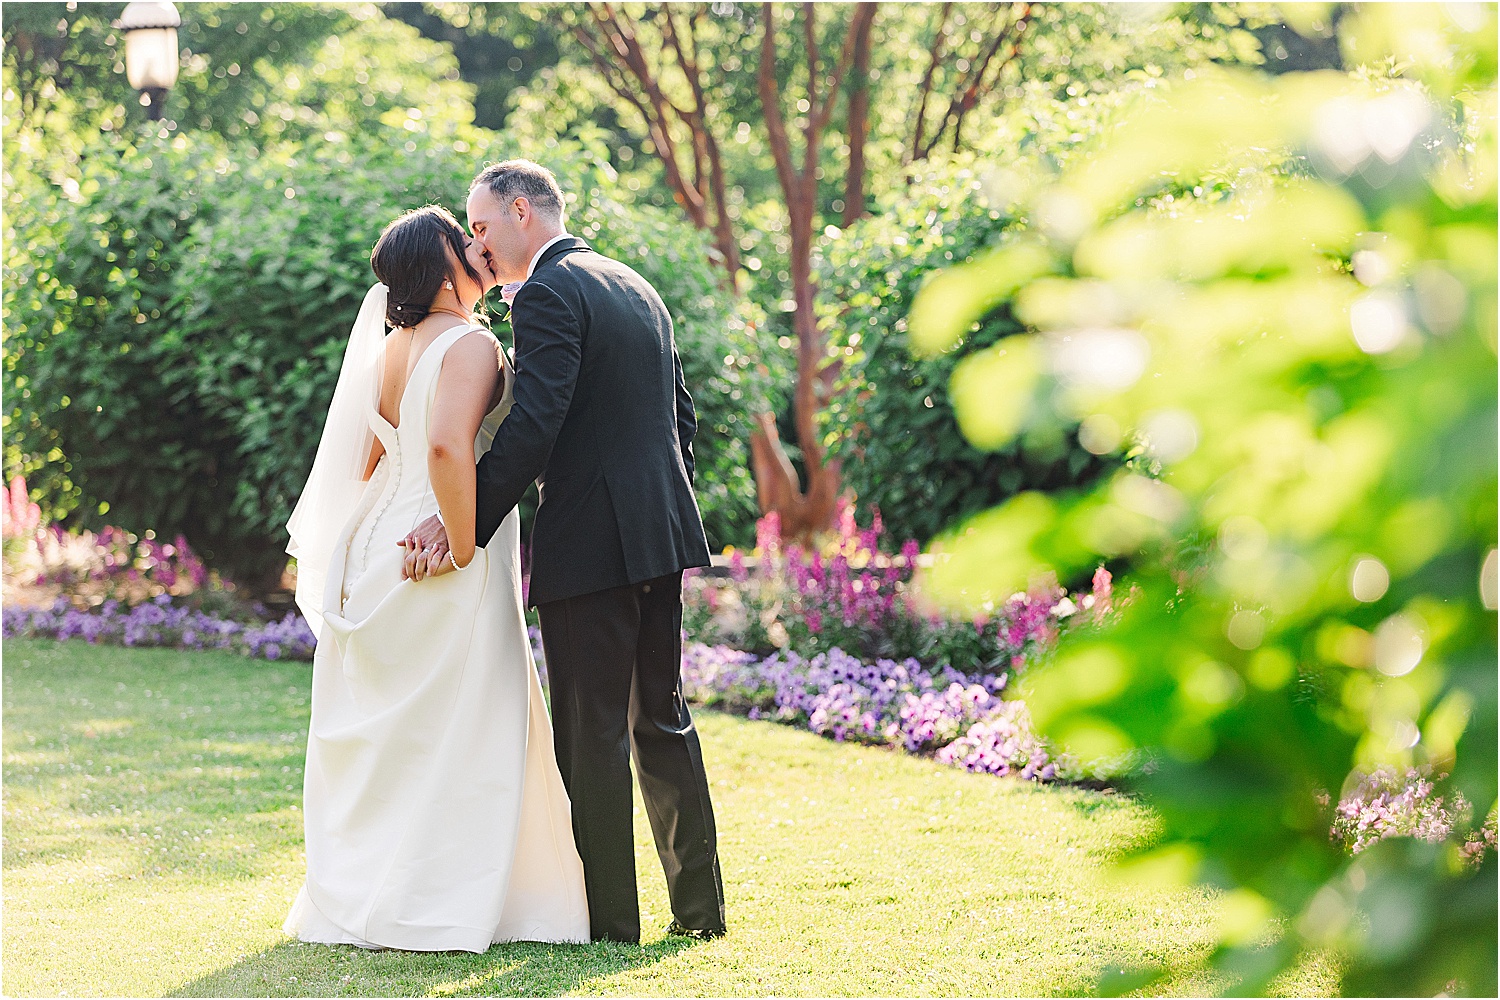 bride and groom at outdoor courtyard at phipps conservatory • Wild Weather - Love at a Phipps Conservatory Outdoor Garden Wedding